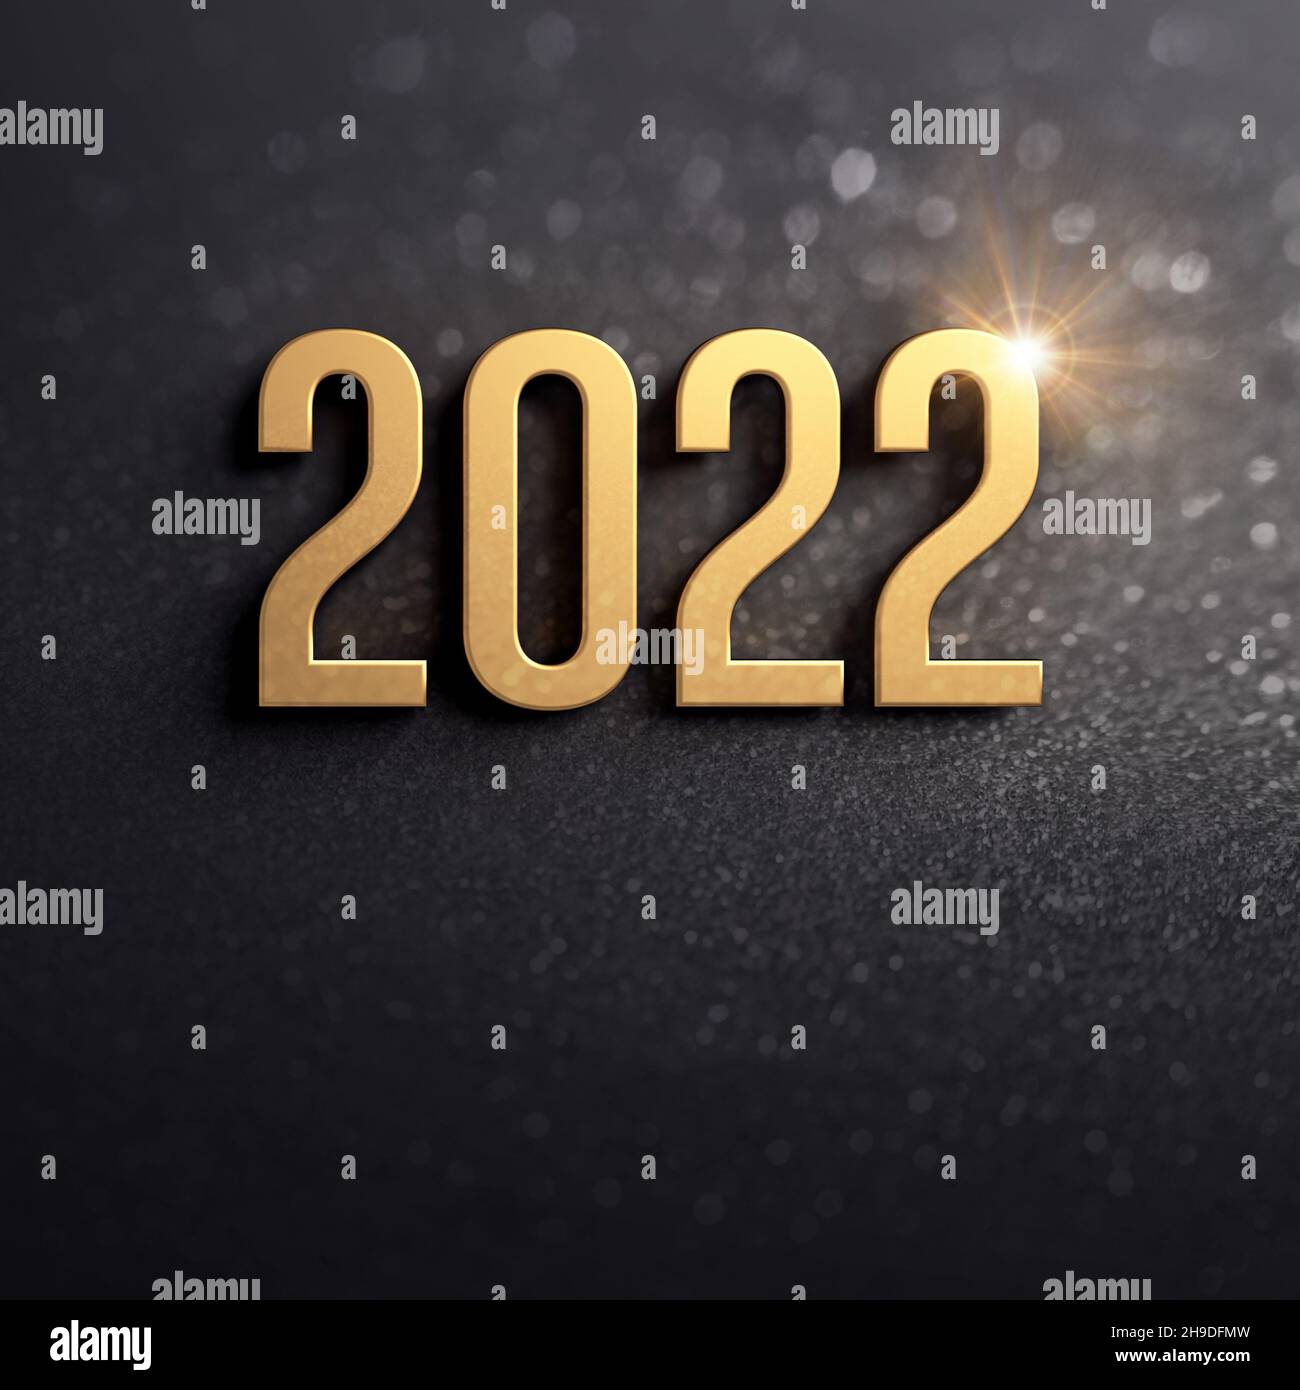 New year greeting card 2022. Date number colored in gold on a glittering black background Stock Photo